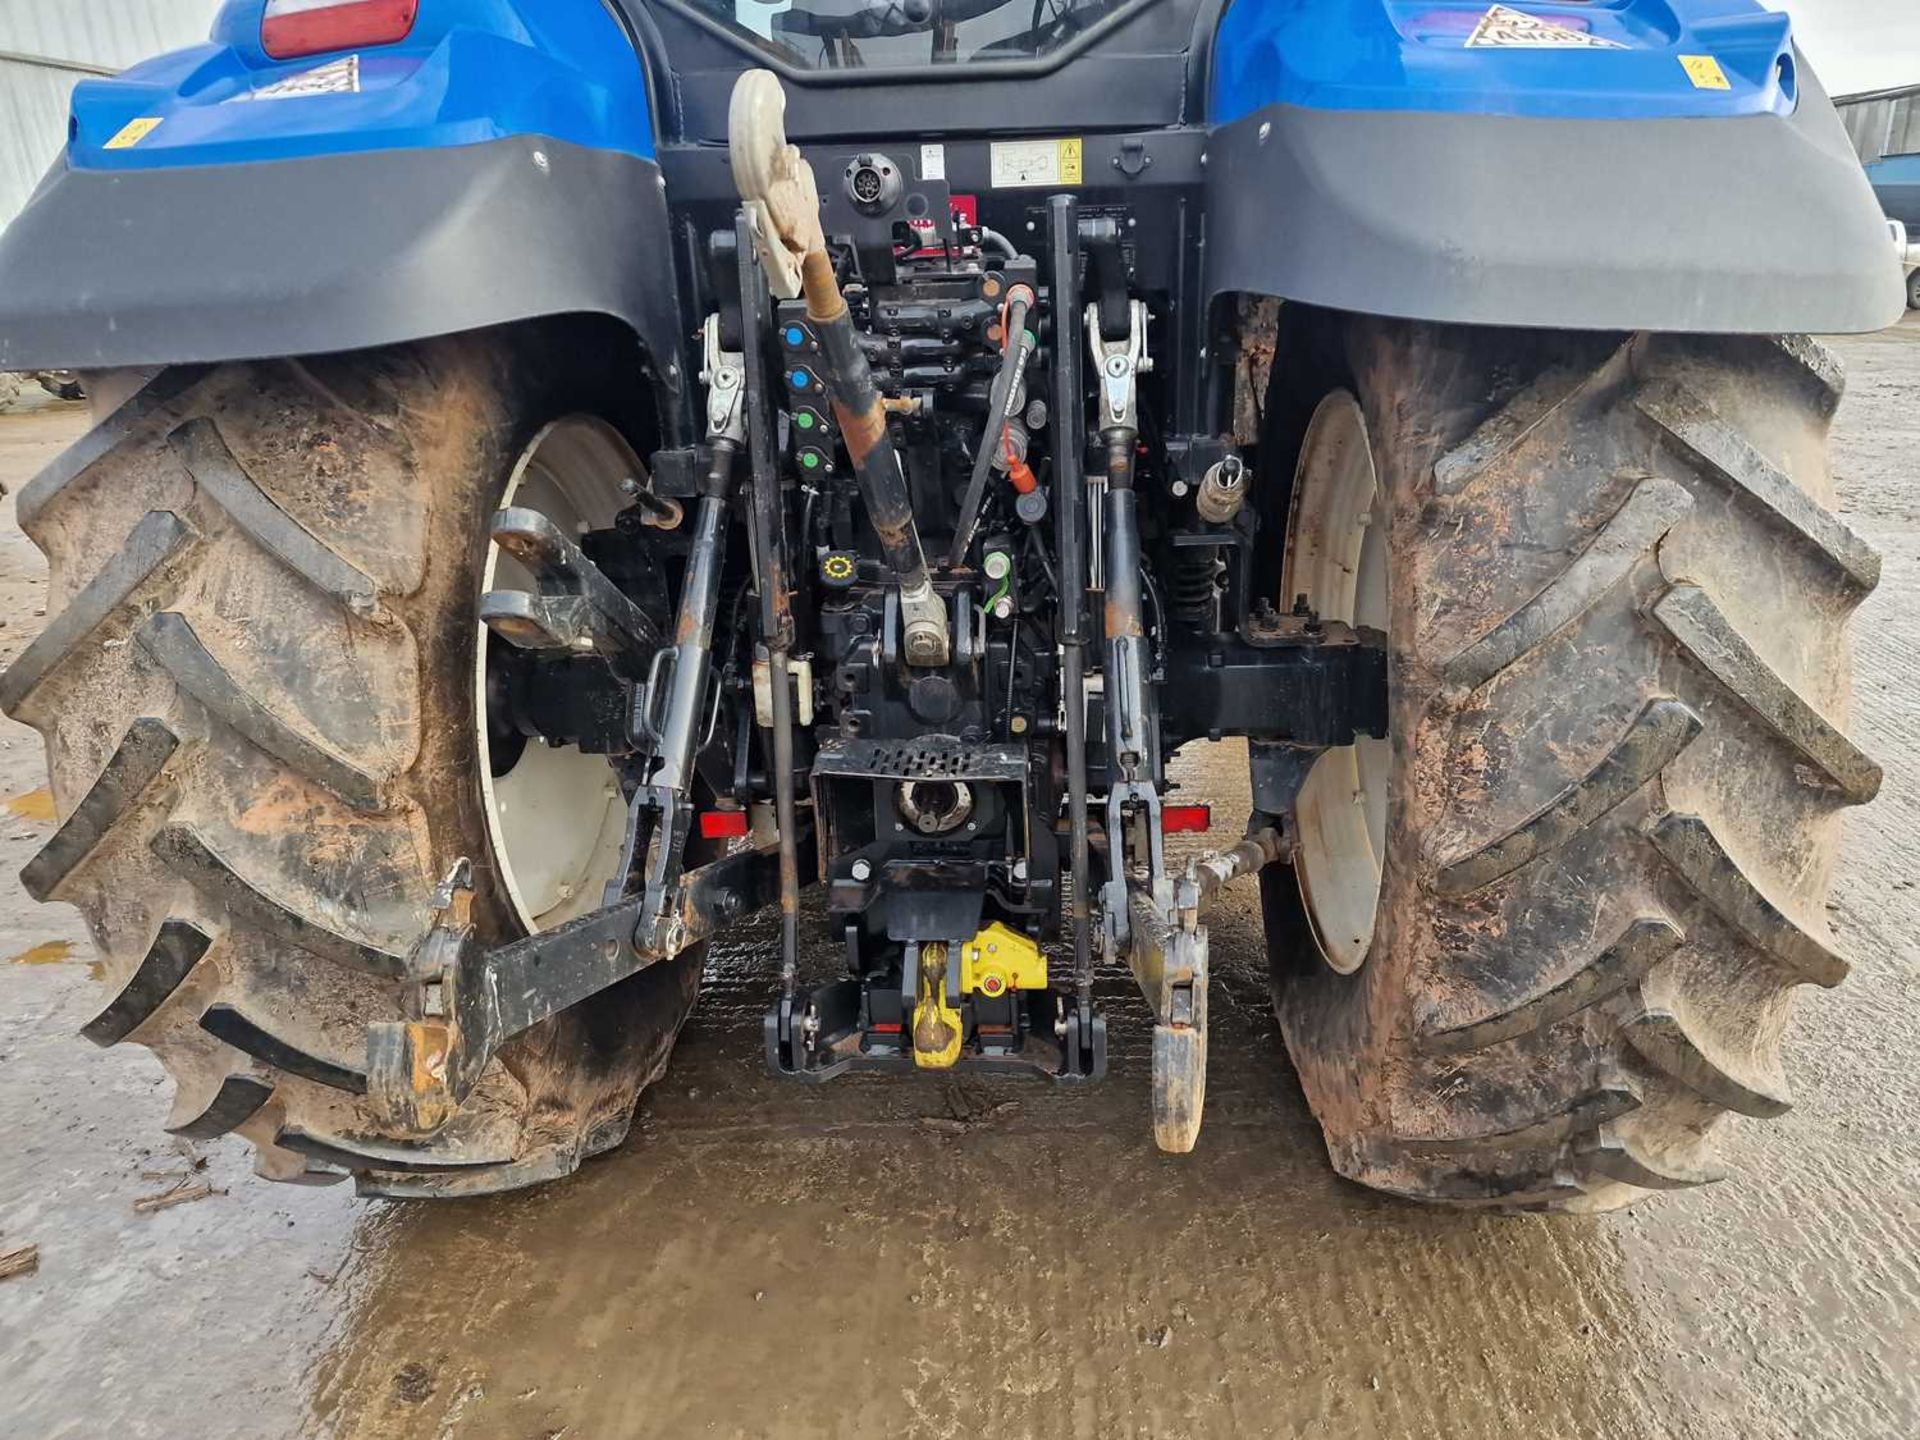 2019 New Holland T6.180 4WD Tractor, Cab Suspension, 3 Spool Valves, Push Out Hitch, A/C - Image 11 of 28